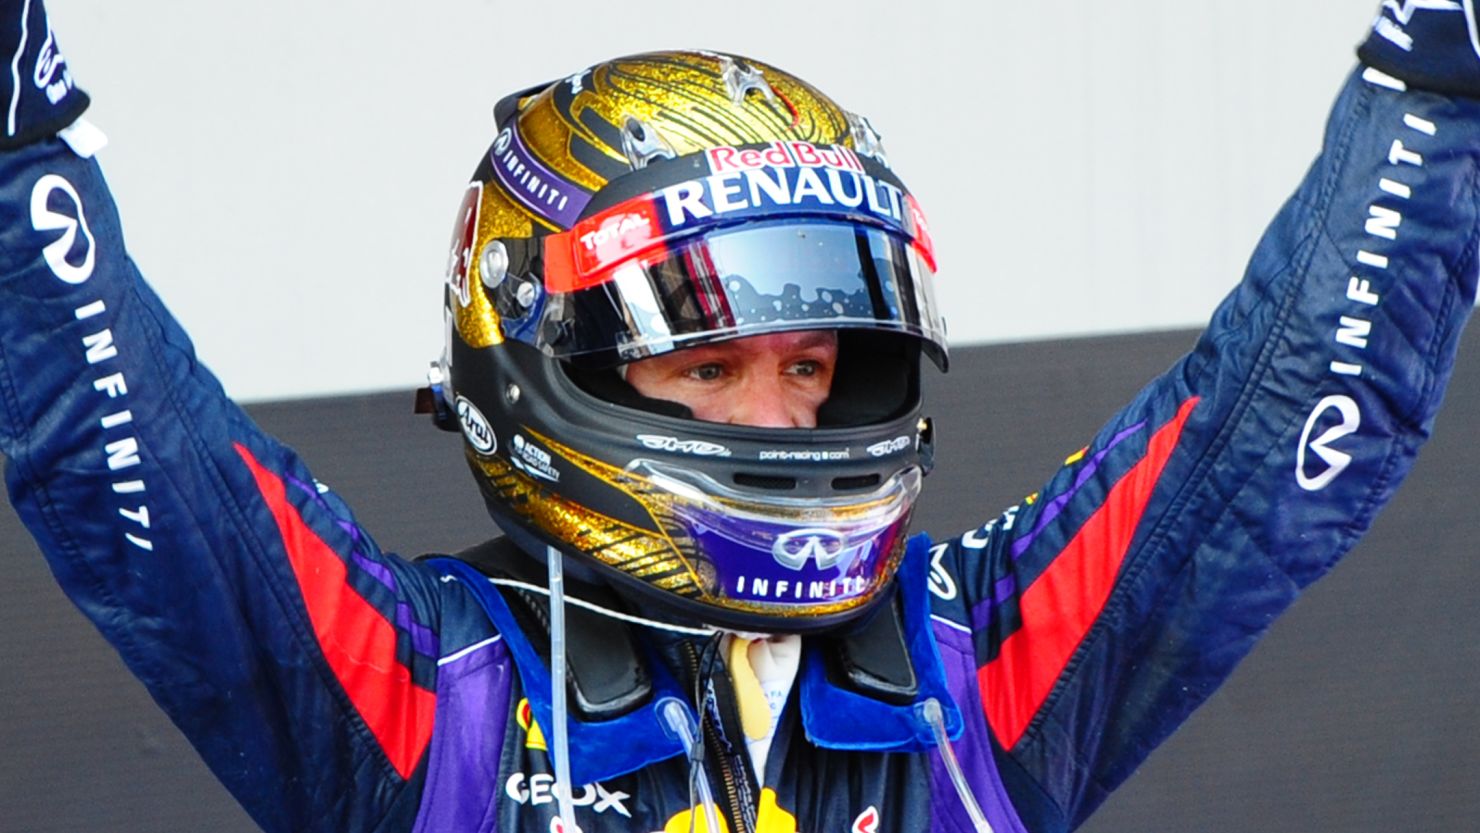 Sebastian Vettel regularly changes his helmet and his gold one worn in Germany (pictured) has sold for a record price